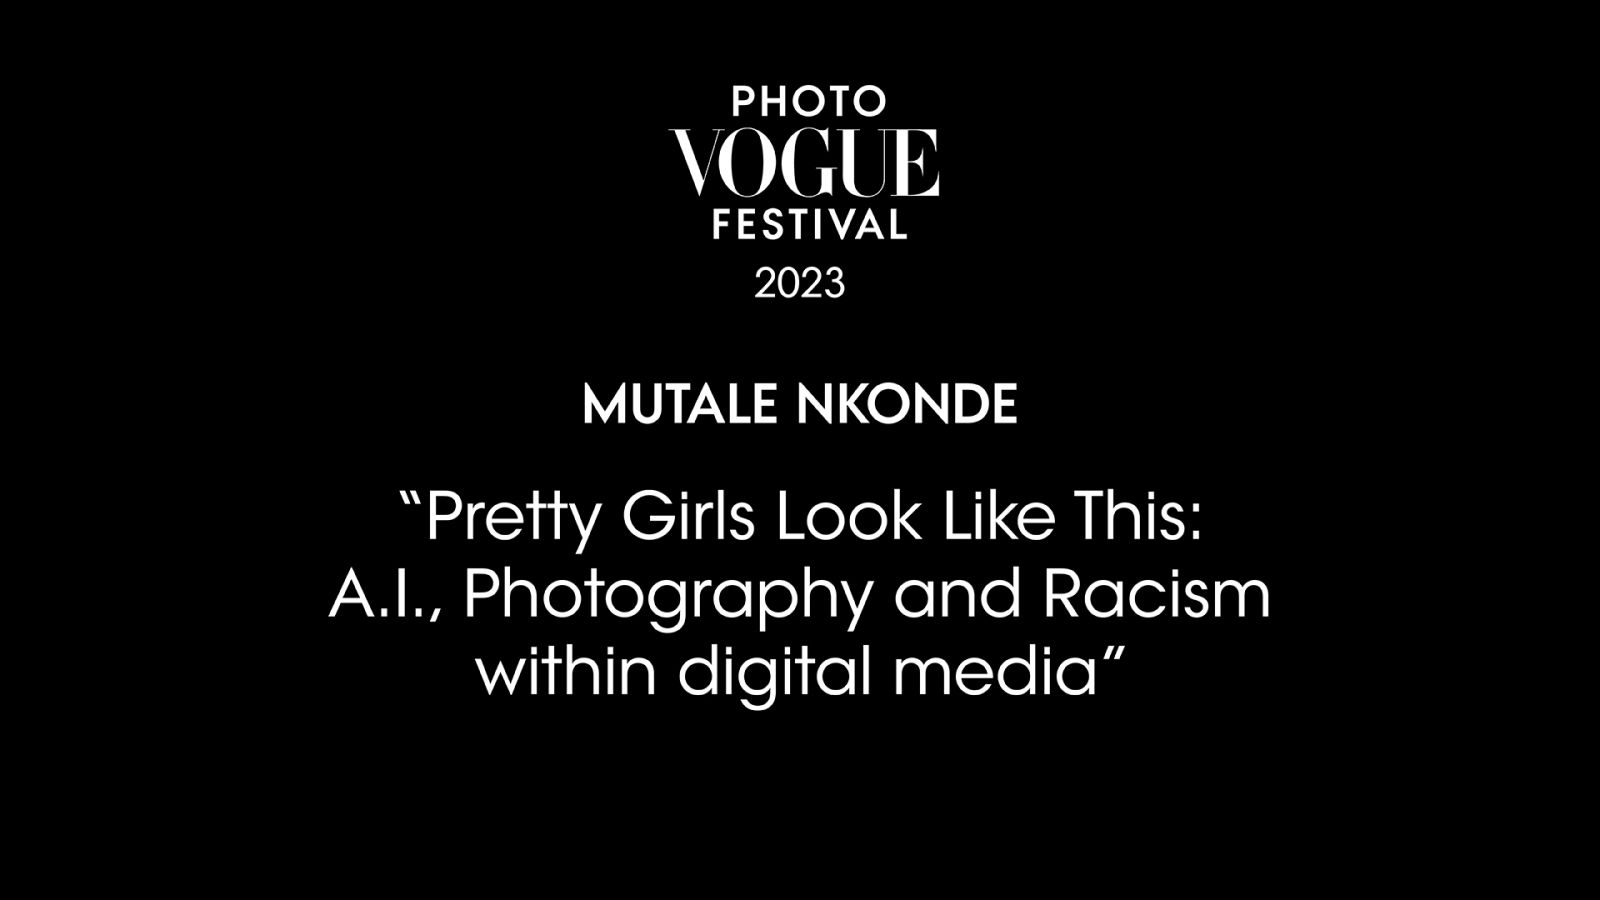 Pretty Girls Look Like This: A.I., Photography and Racism within digital media | PhotoVogue Festival 2023: What Makes Us Human? Image in the Age of A.I.